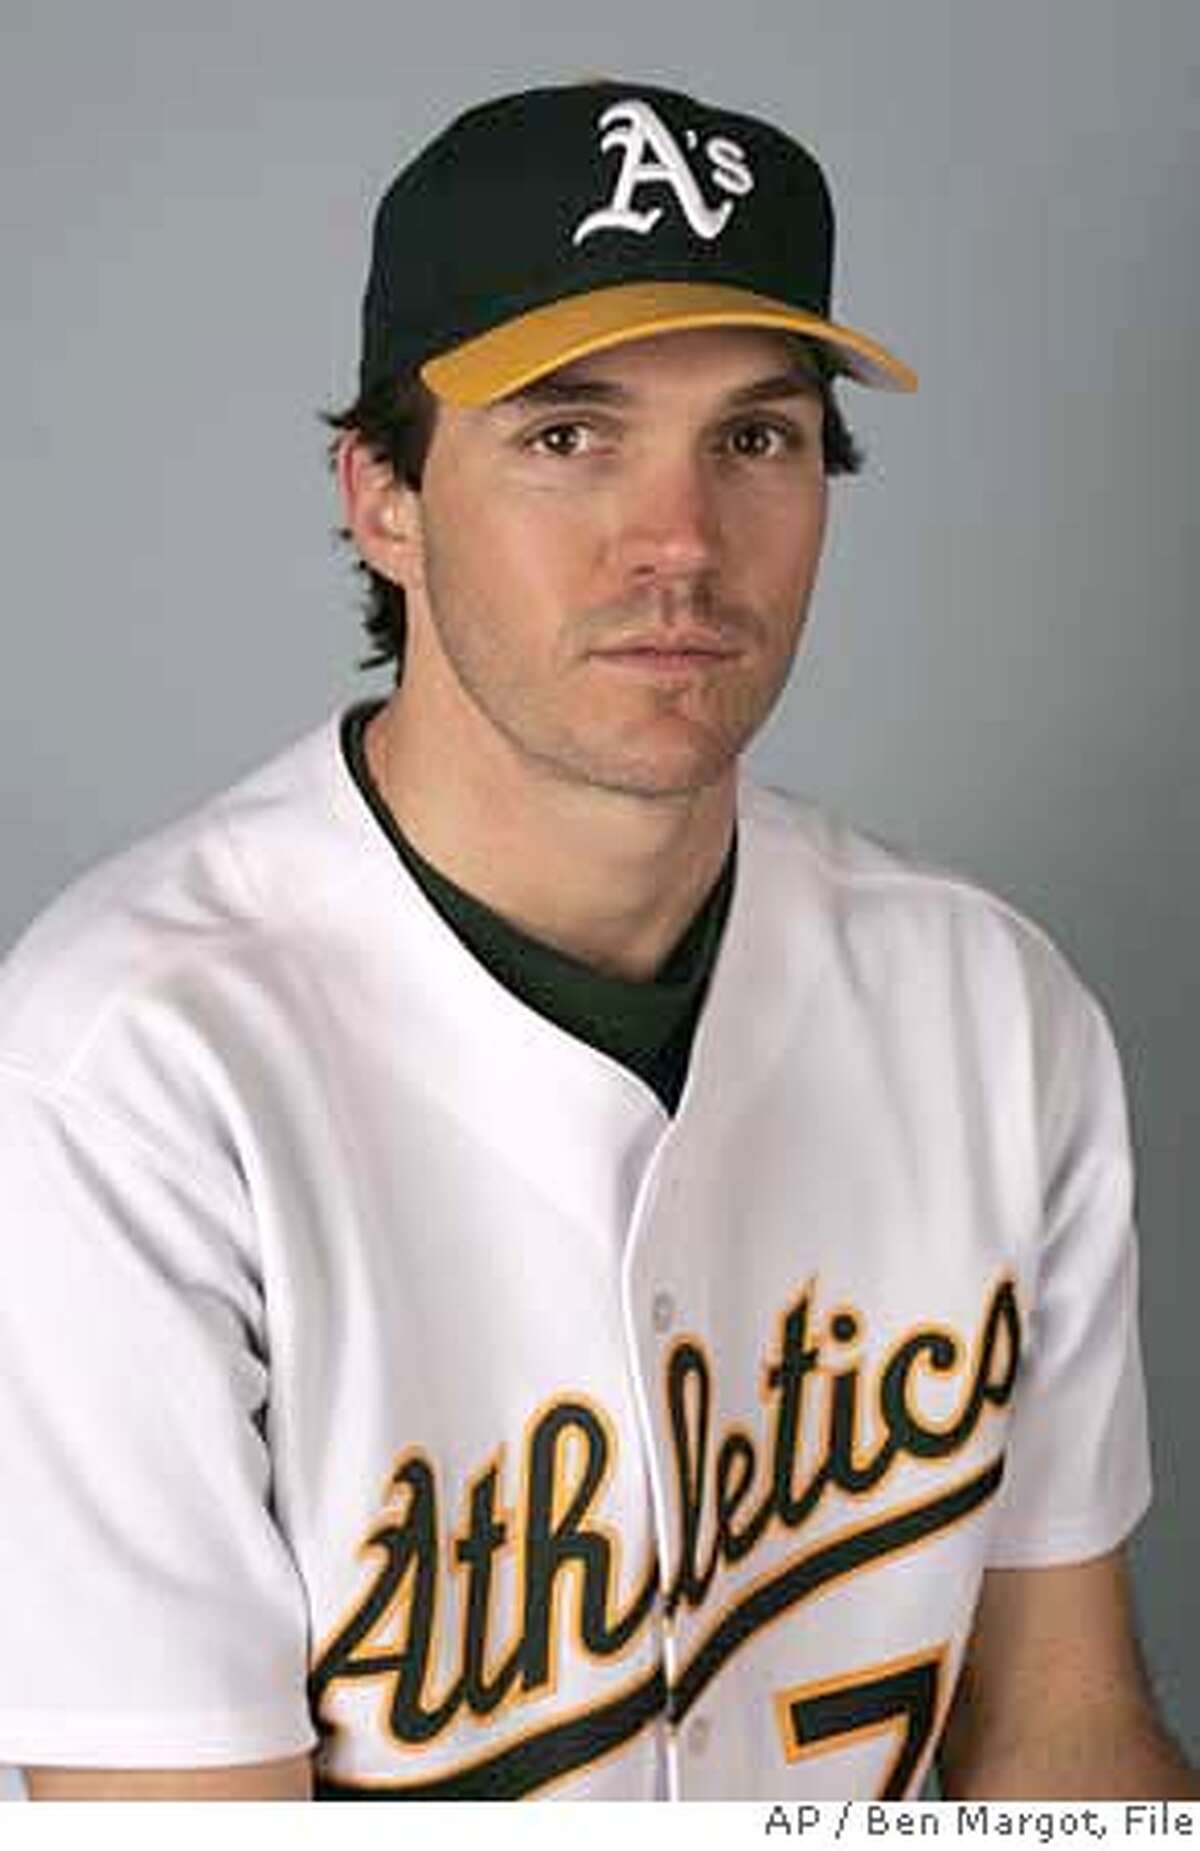 ** FILE ** This is a 2006 file photo of Barry Zito of the Oakland Athletics. Zito and the San Francisco Giants have reached a preliminary agreement on a $126 million, seven-year contract, a person familiar with the negotiations told The Associated Press on Thursday, Dec. 28, 2006. (AP Photo/Ben Margot) A 2006 FILE PHOTO